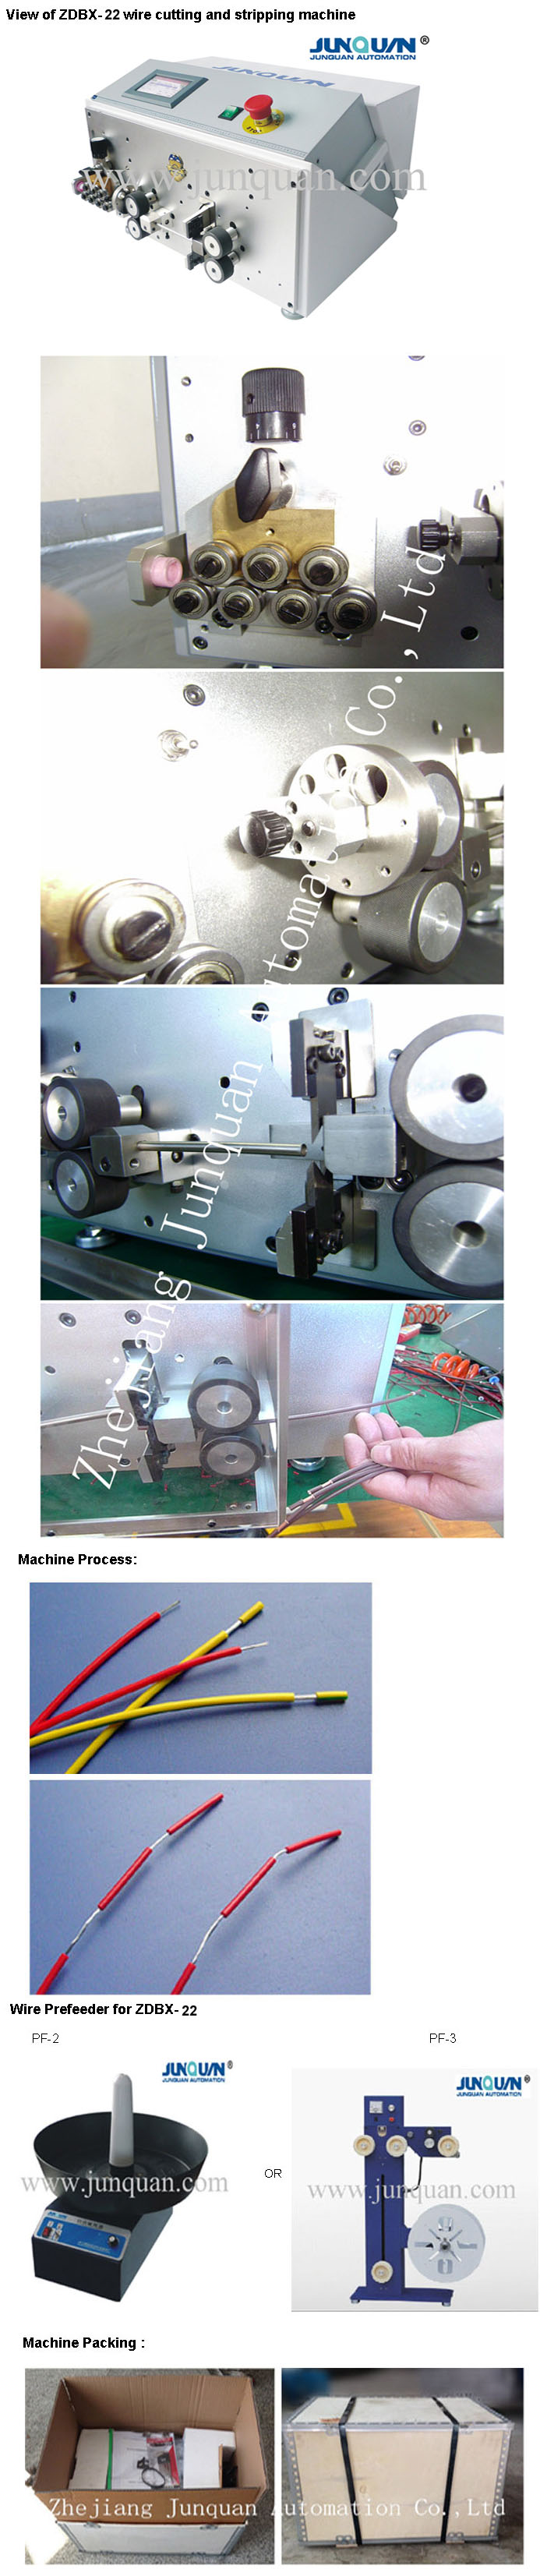 Automatic Cable Cutting and Stripping Machine (ZDBX-22)